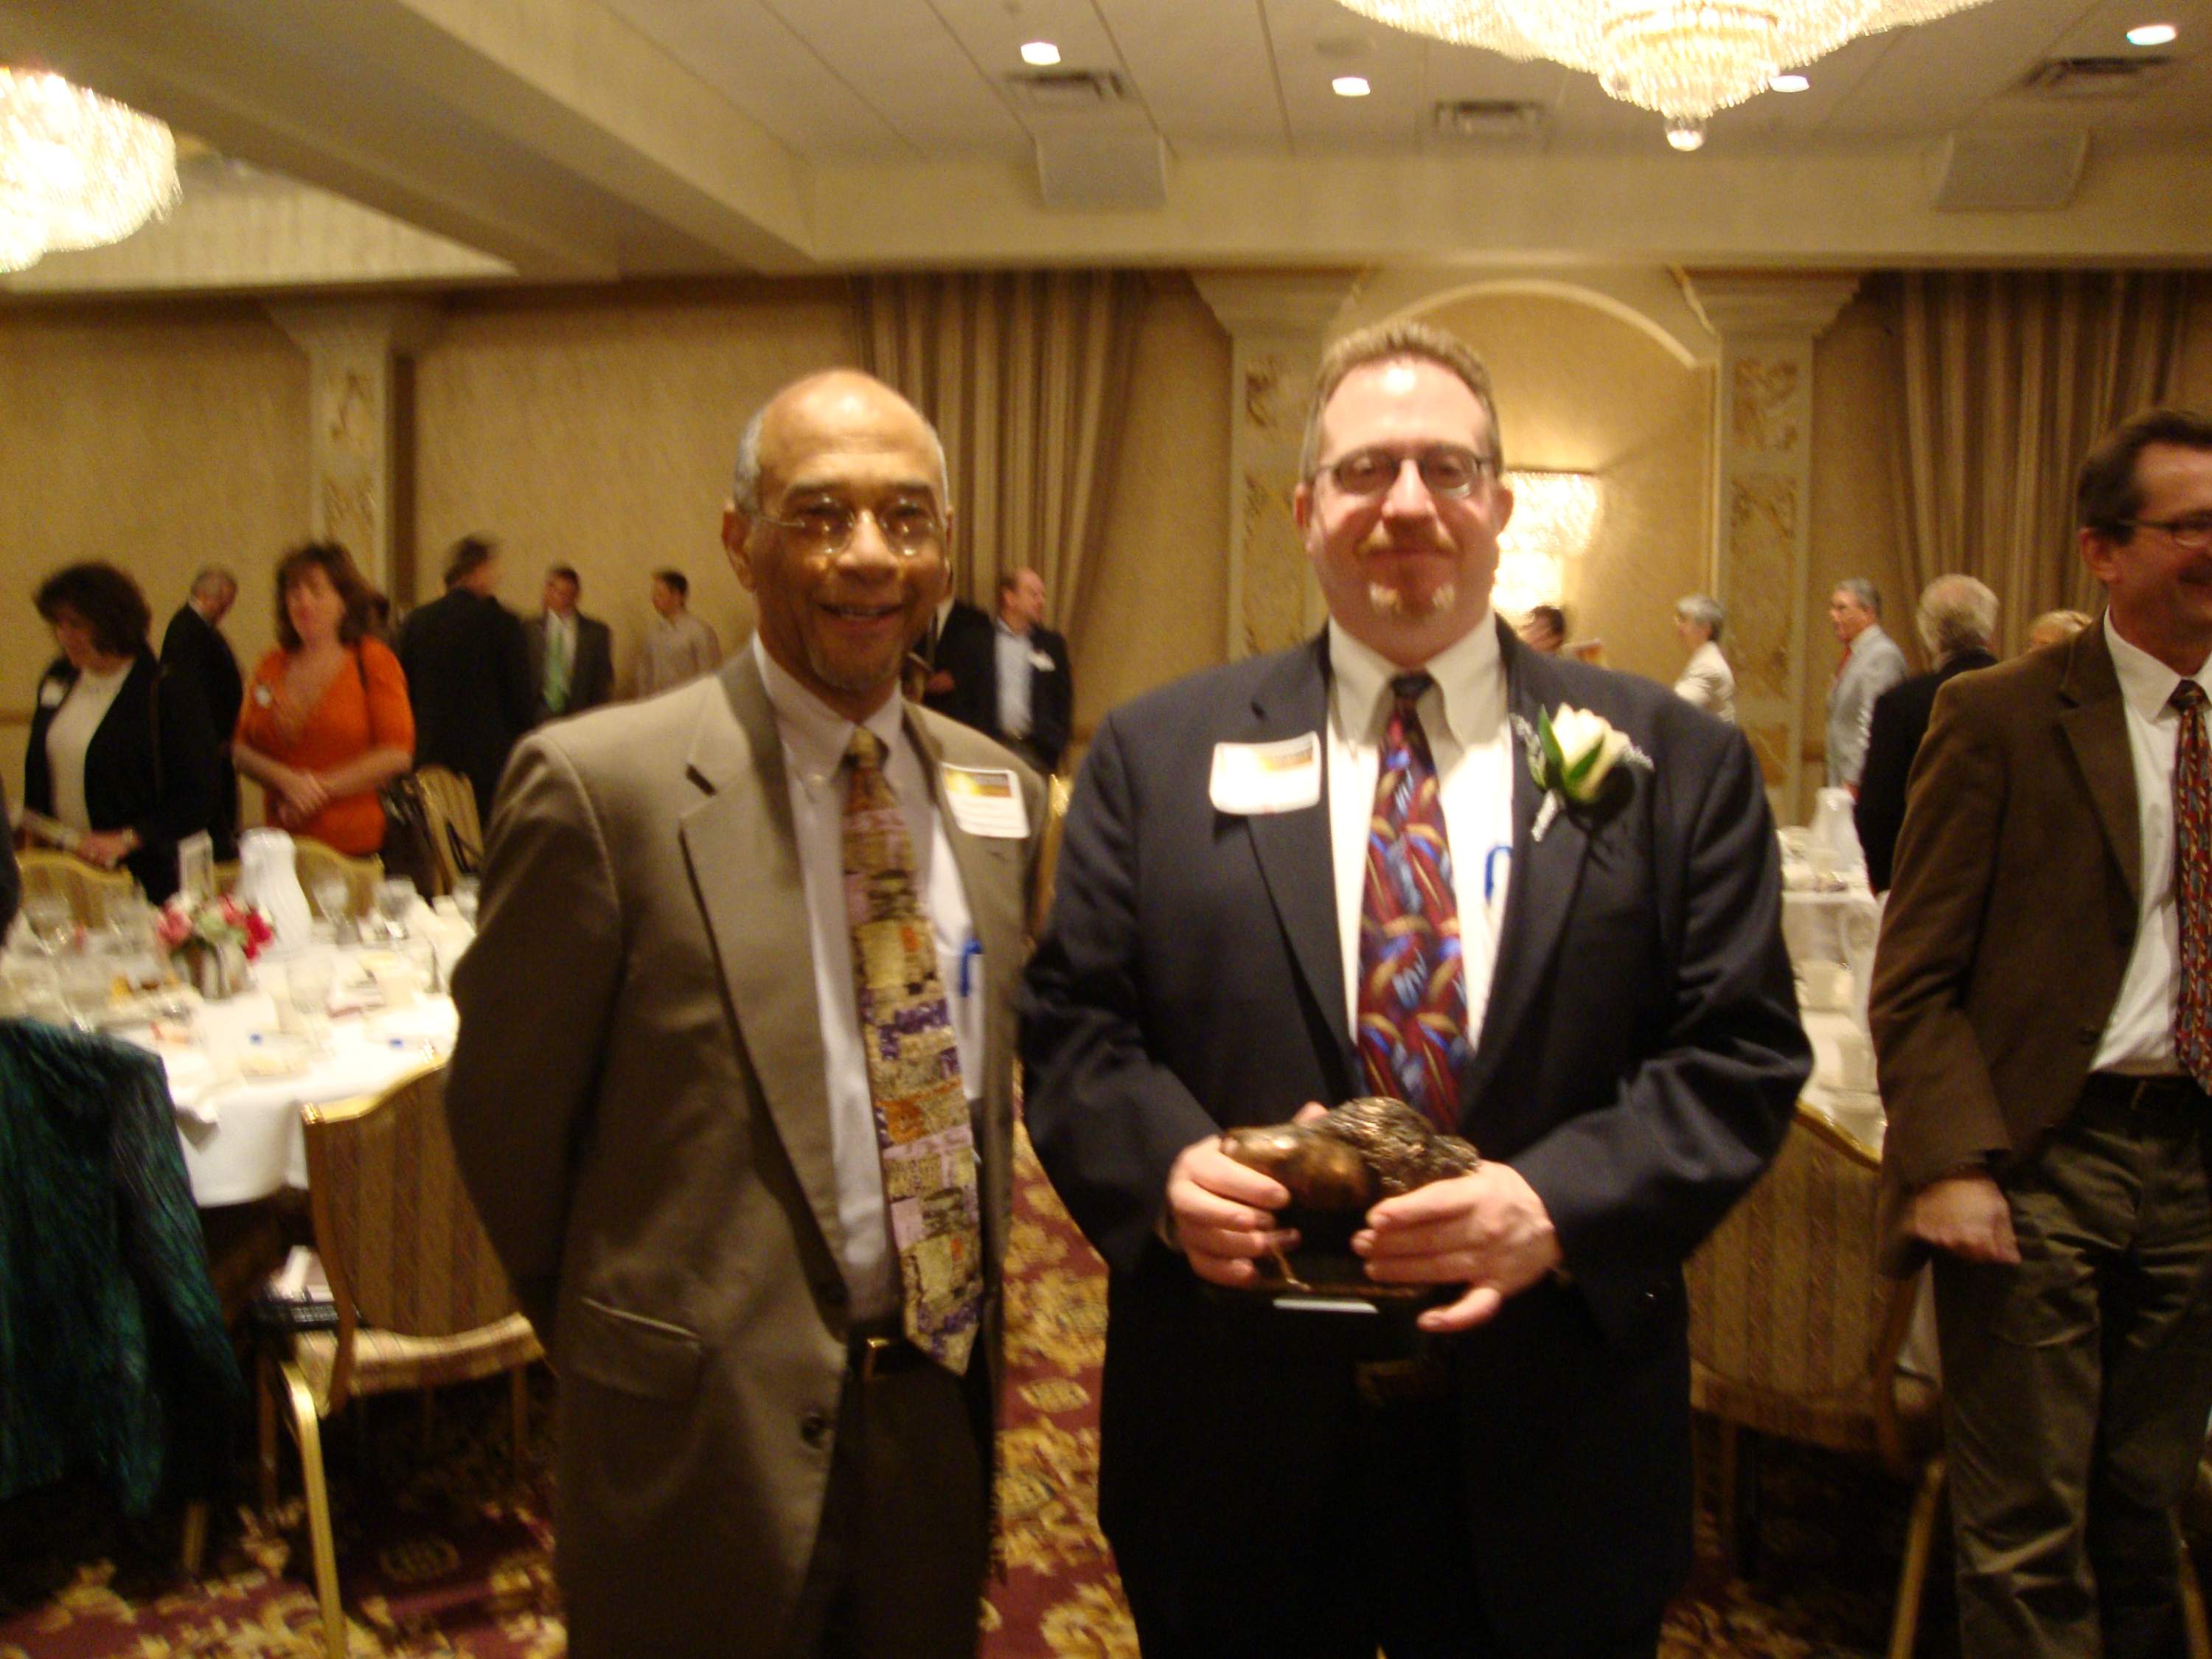 Ed Watts, Sr., pictured with Jim Cahill